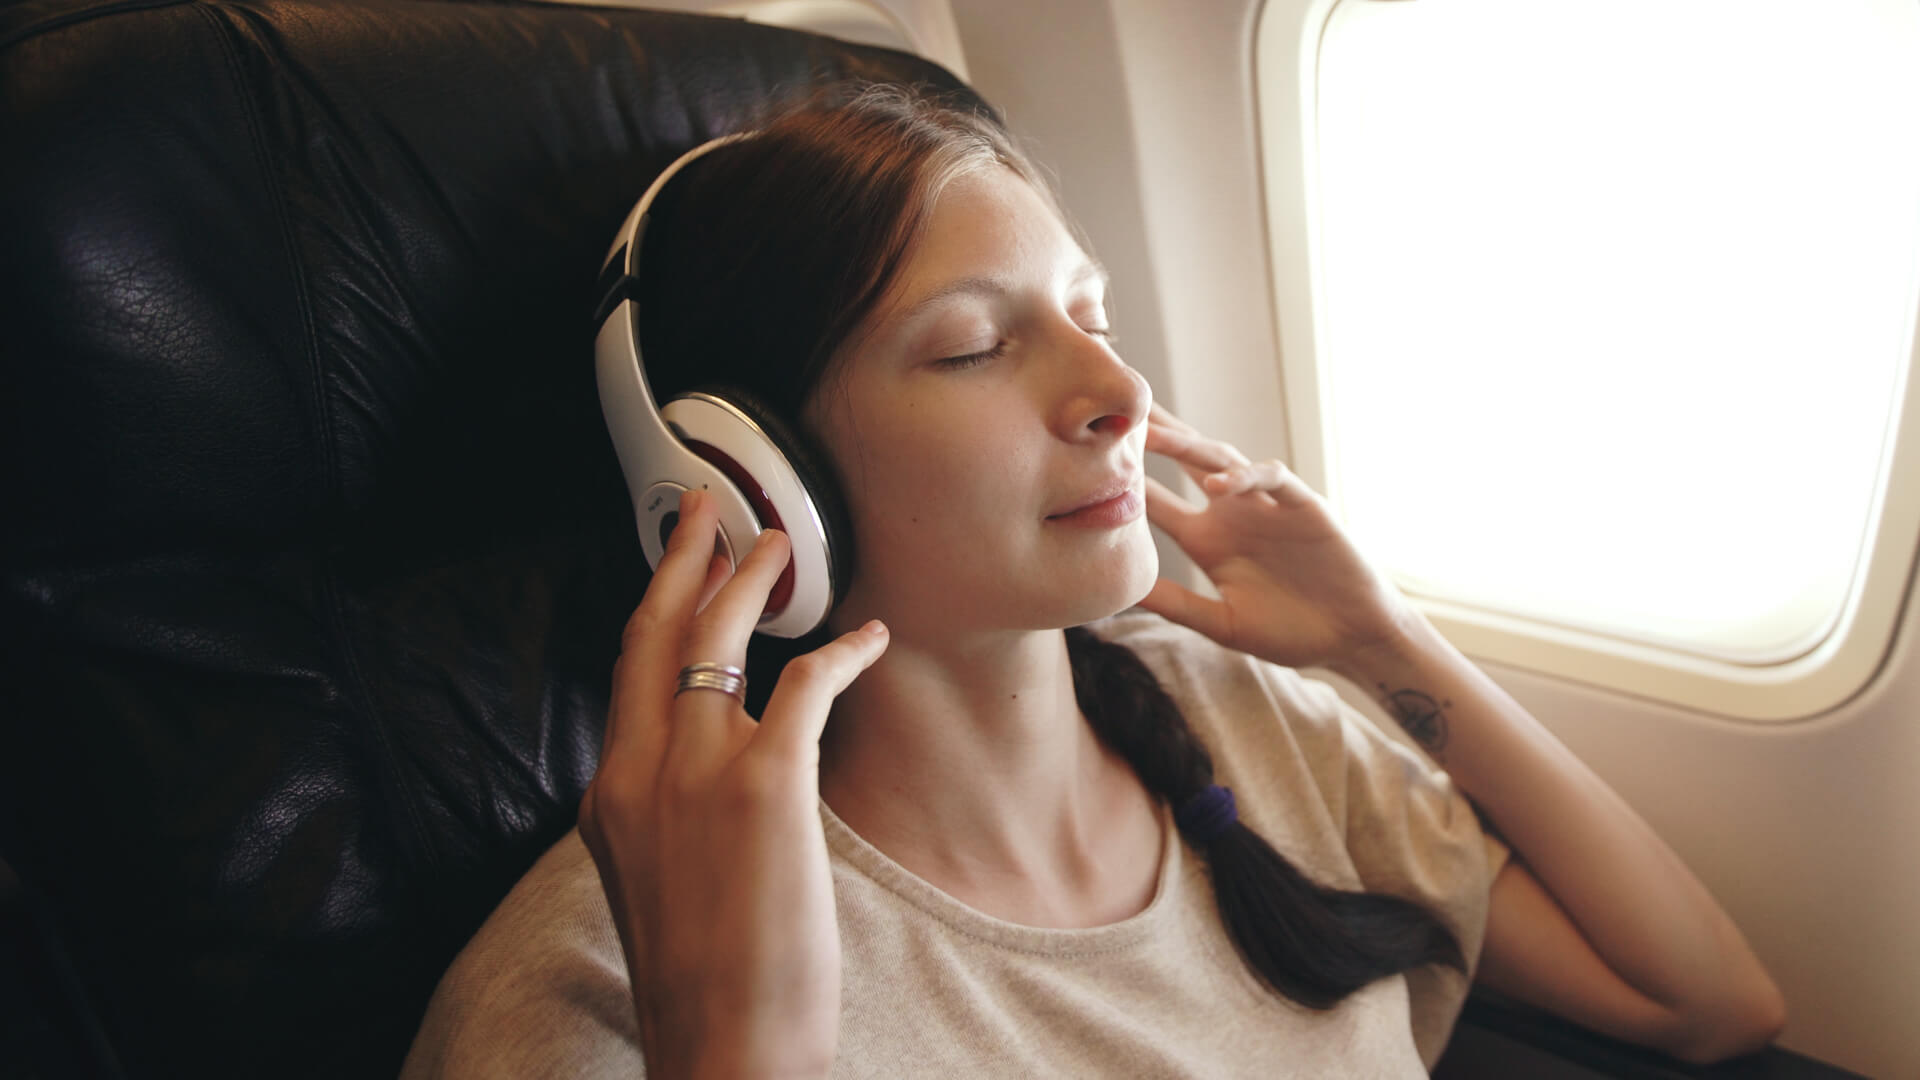 <p>Matthews said that noise-canceling headphones, such as the Bose Noise-Canceling Headphones 700, which retail for around $380, are often preferred by the rich. They offer a serene and uninterrupted travel experience for those who highly value both comfort and performance from this type of gadget. </p>